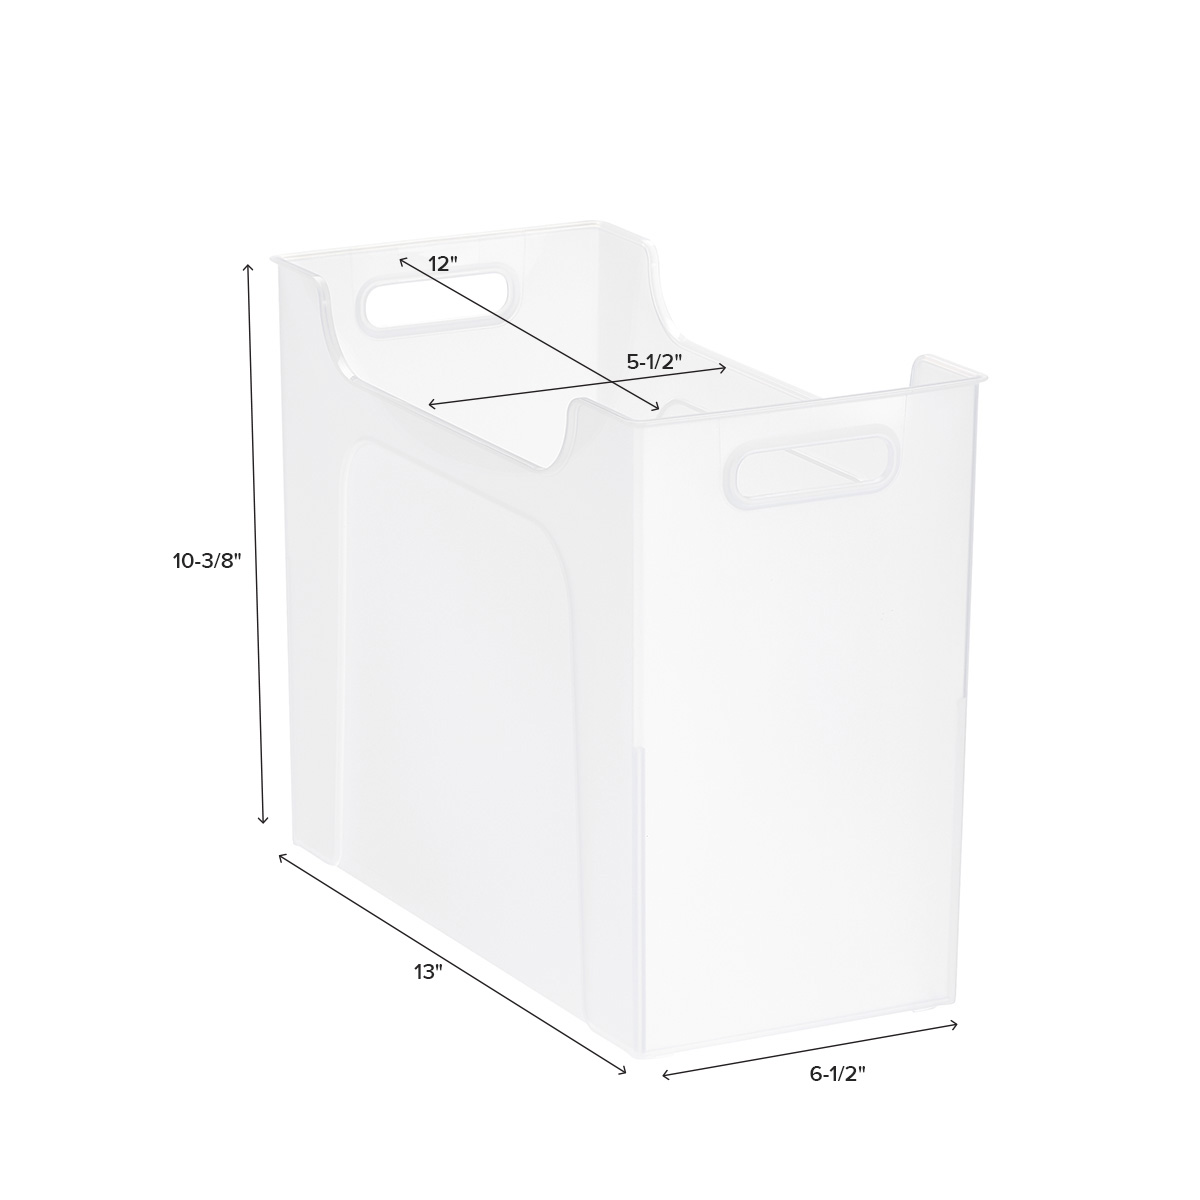 https://www.containerstore.com/catalogimages/445754/10080906-Shimo-tall-bin-translucent-.jpg